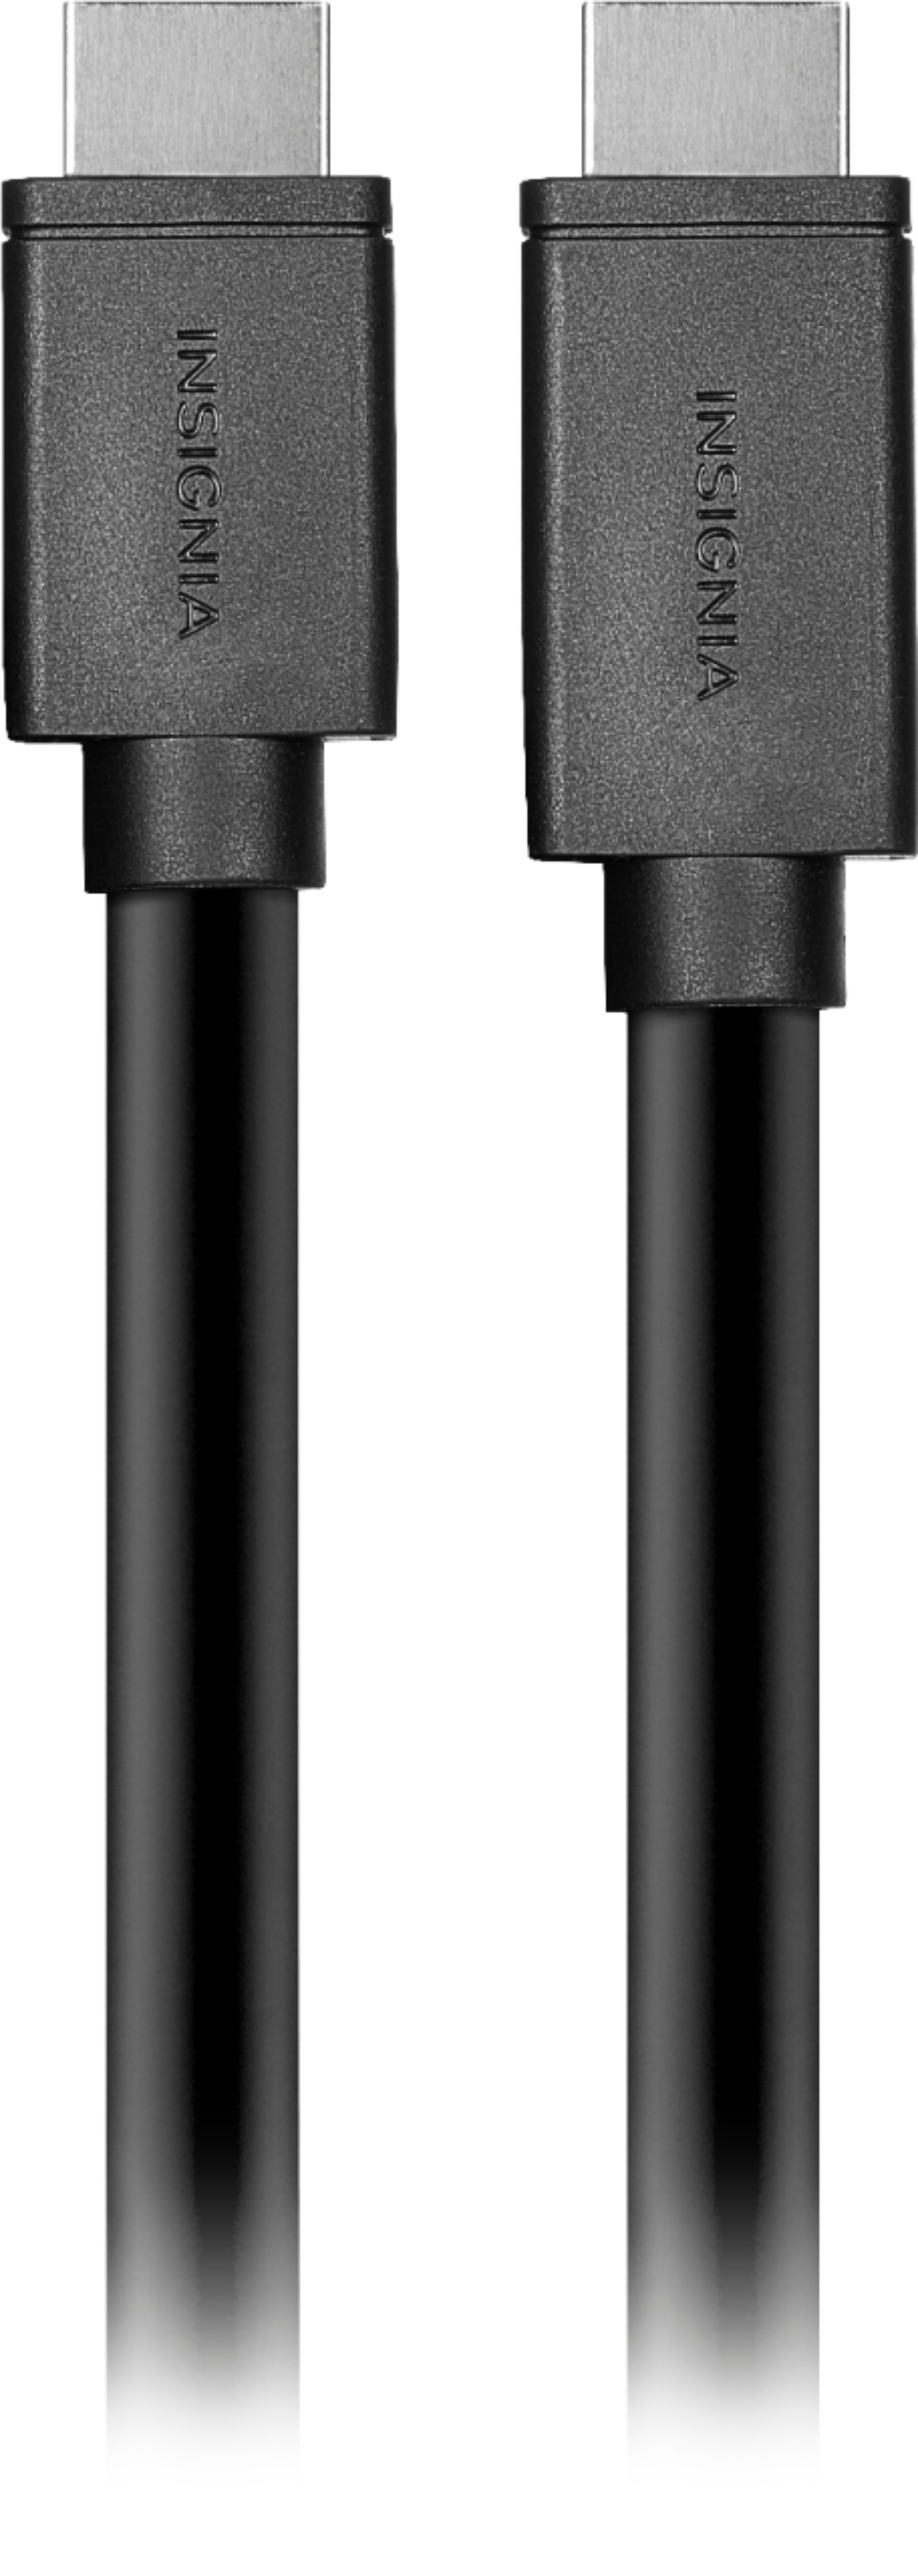 Best Buy: Insignia™ 50' 4K Ultra HD HDMI Cable Black NS-HG50507